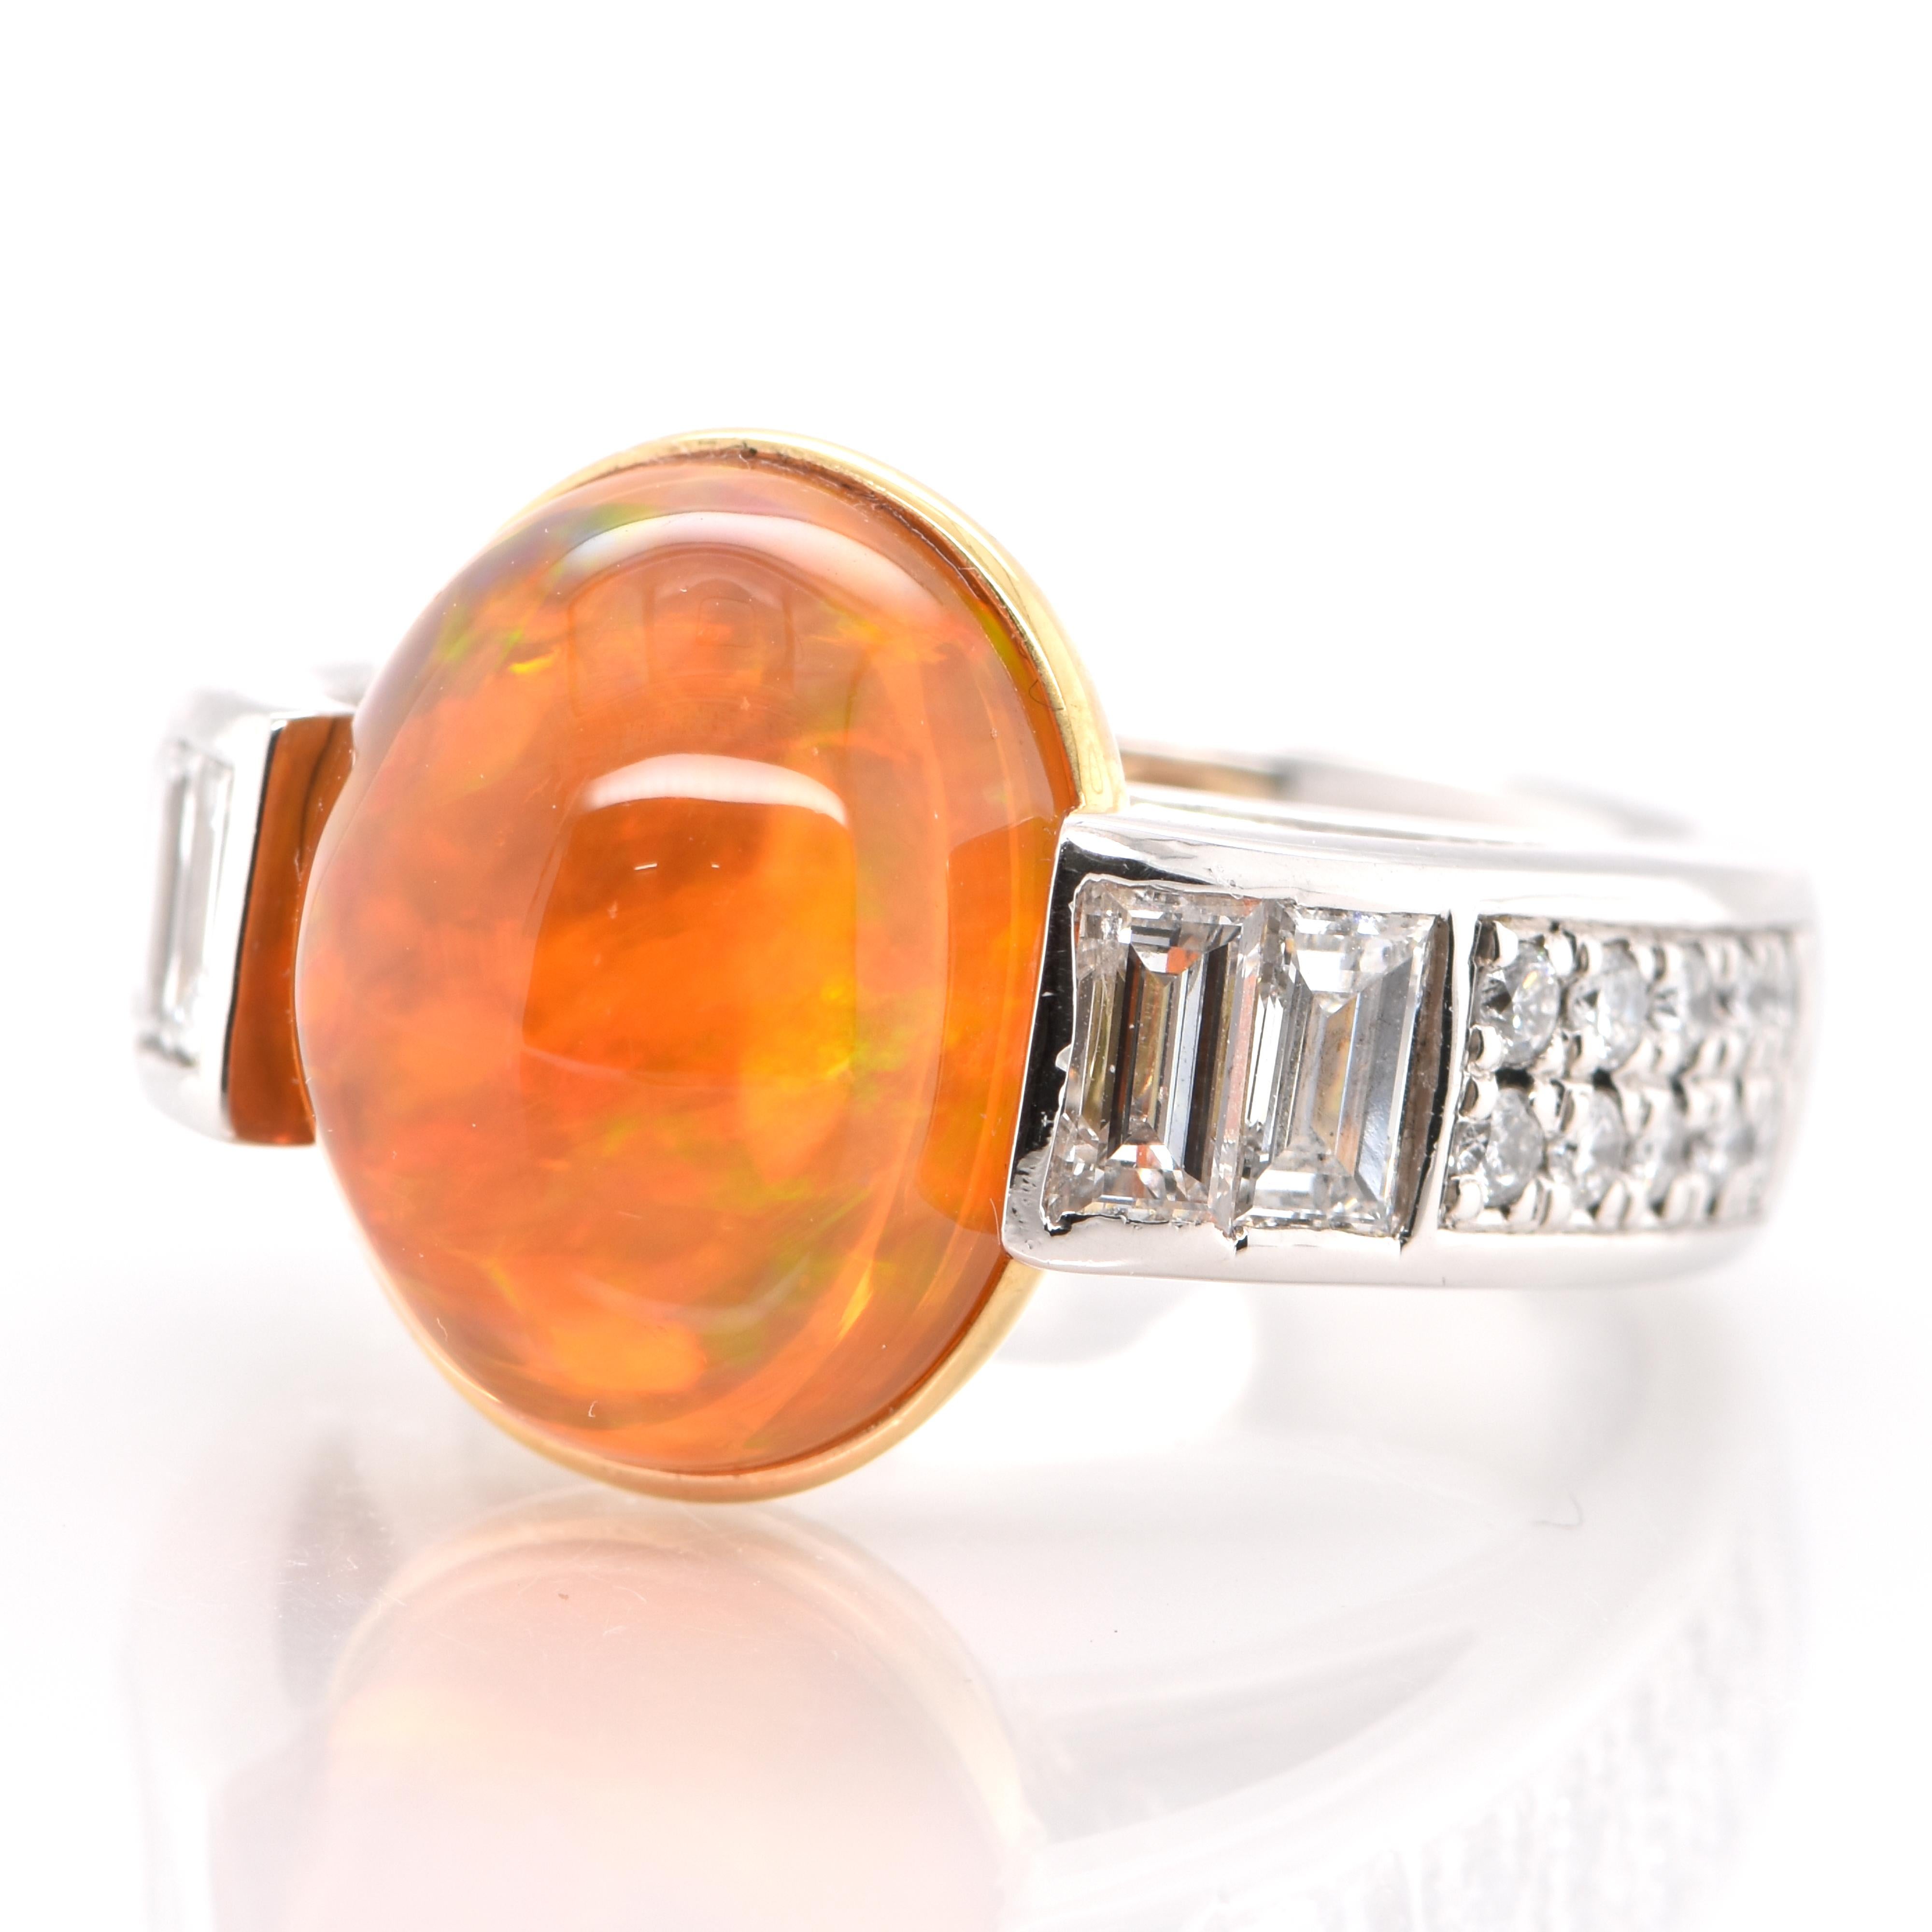 Cabochon 9.03 Carat, Natural Fire Opal and Diamond Cocktail Ring Set in Platinum and 18k